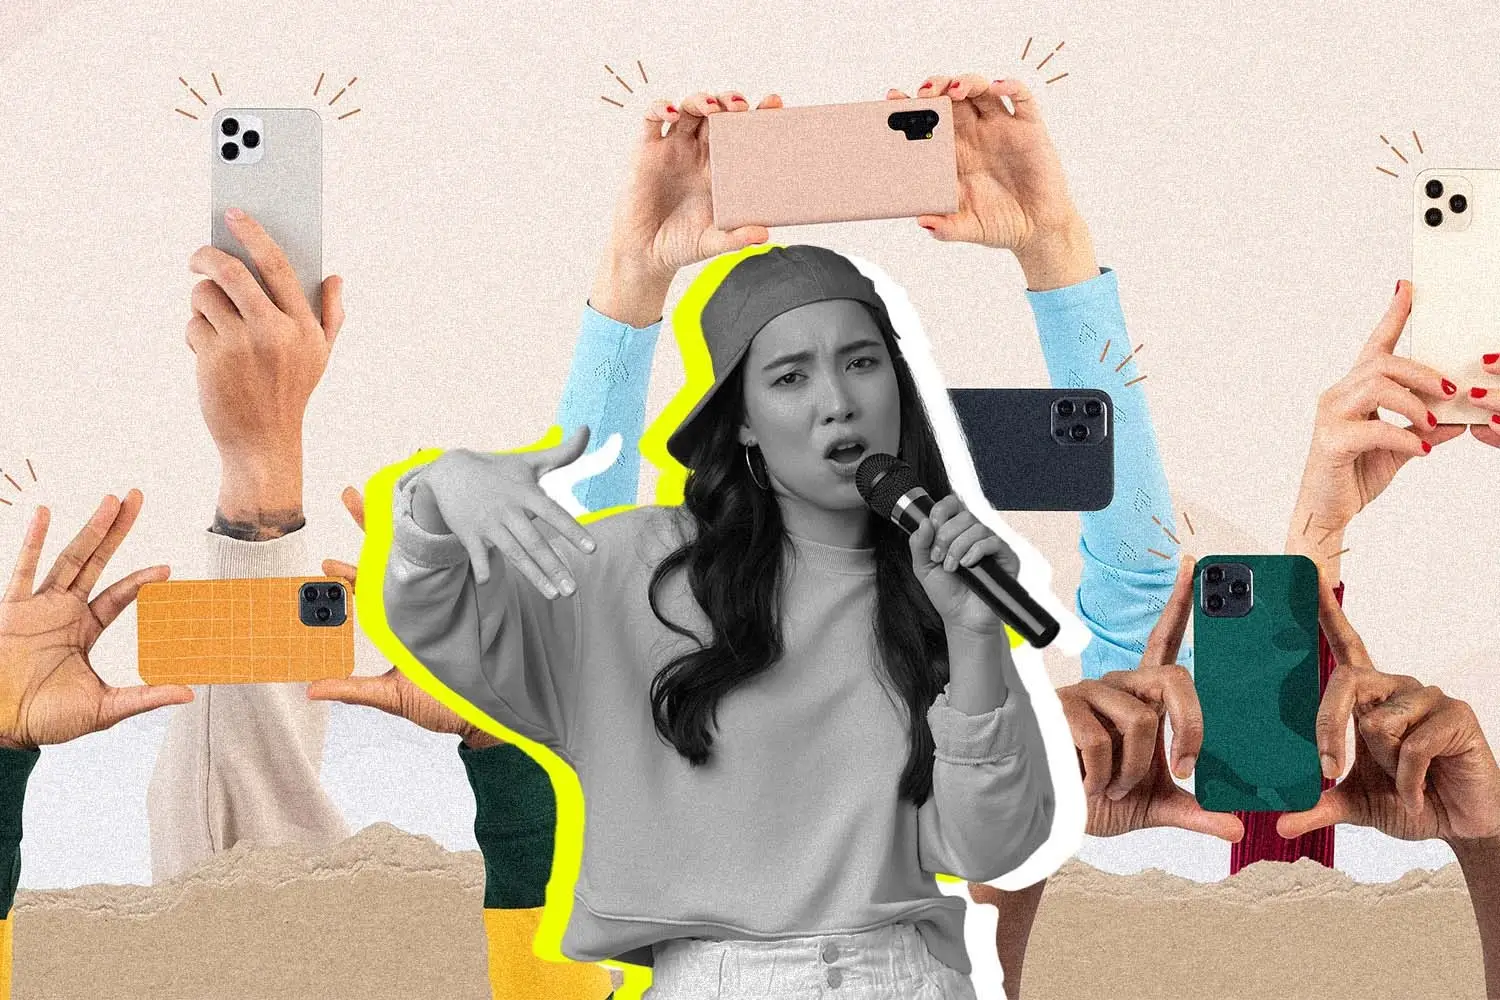 Do you really need to go viral? Here's an influencer showing off her skills to go viral.